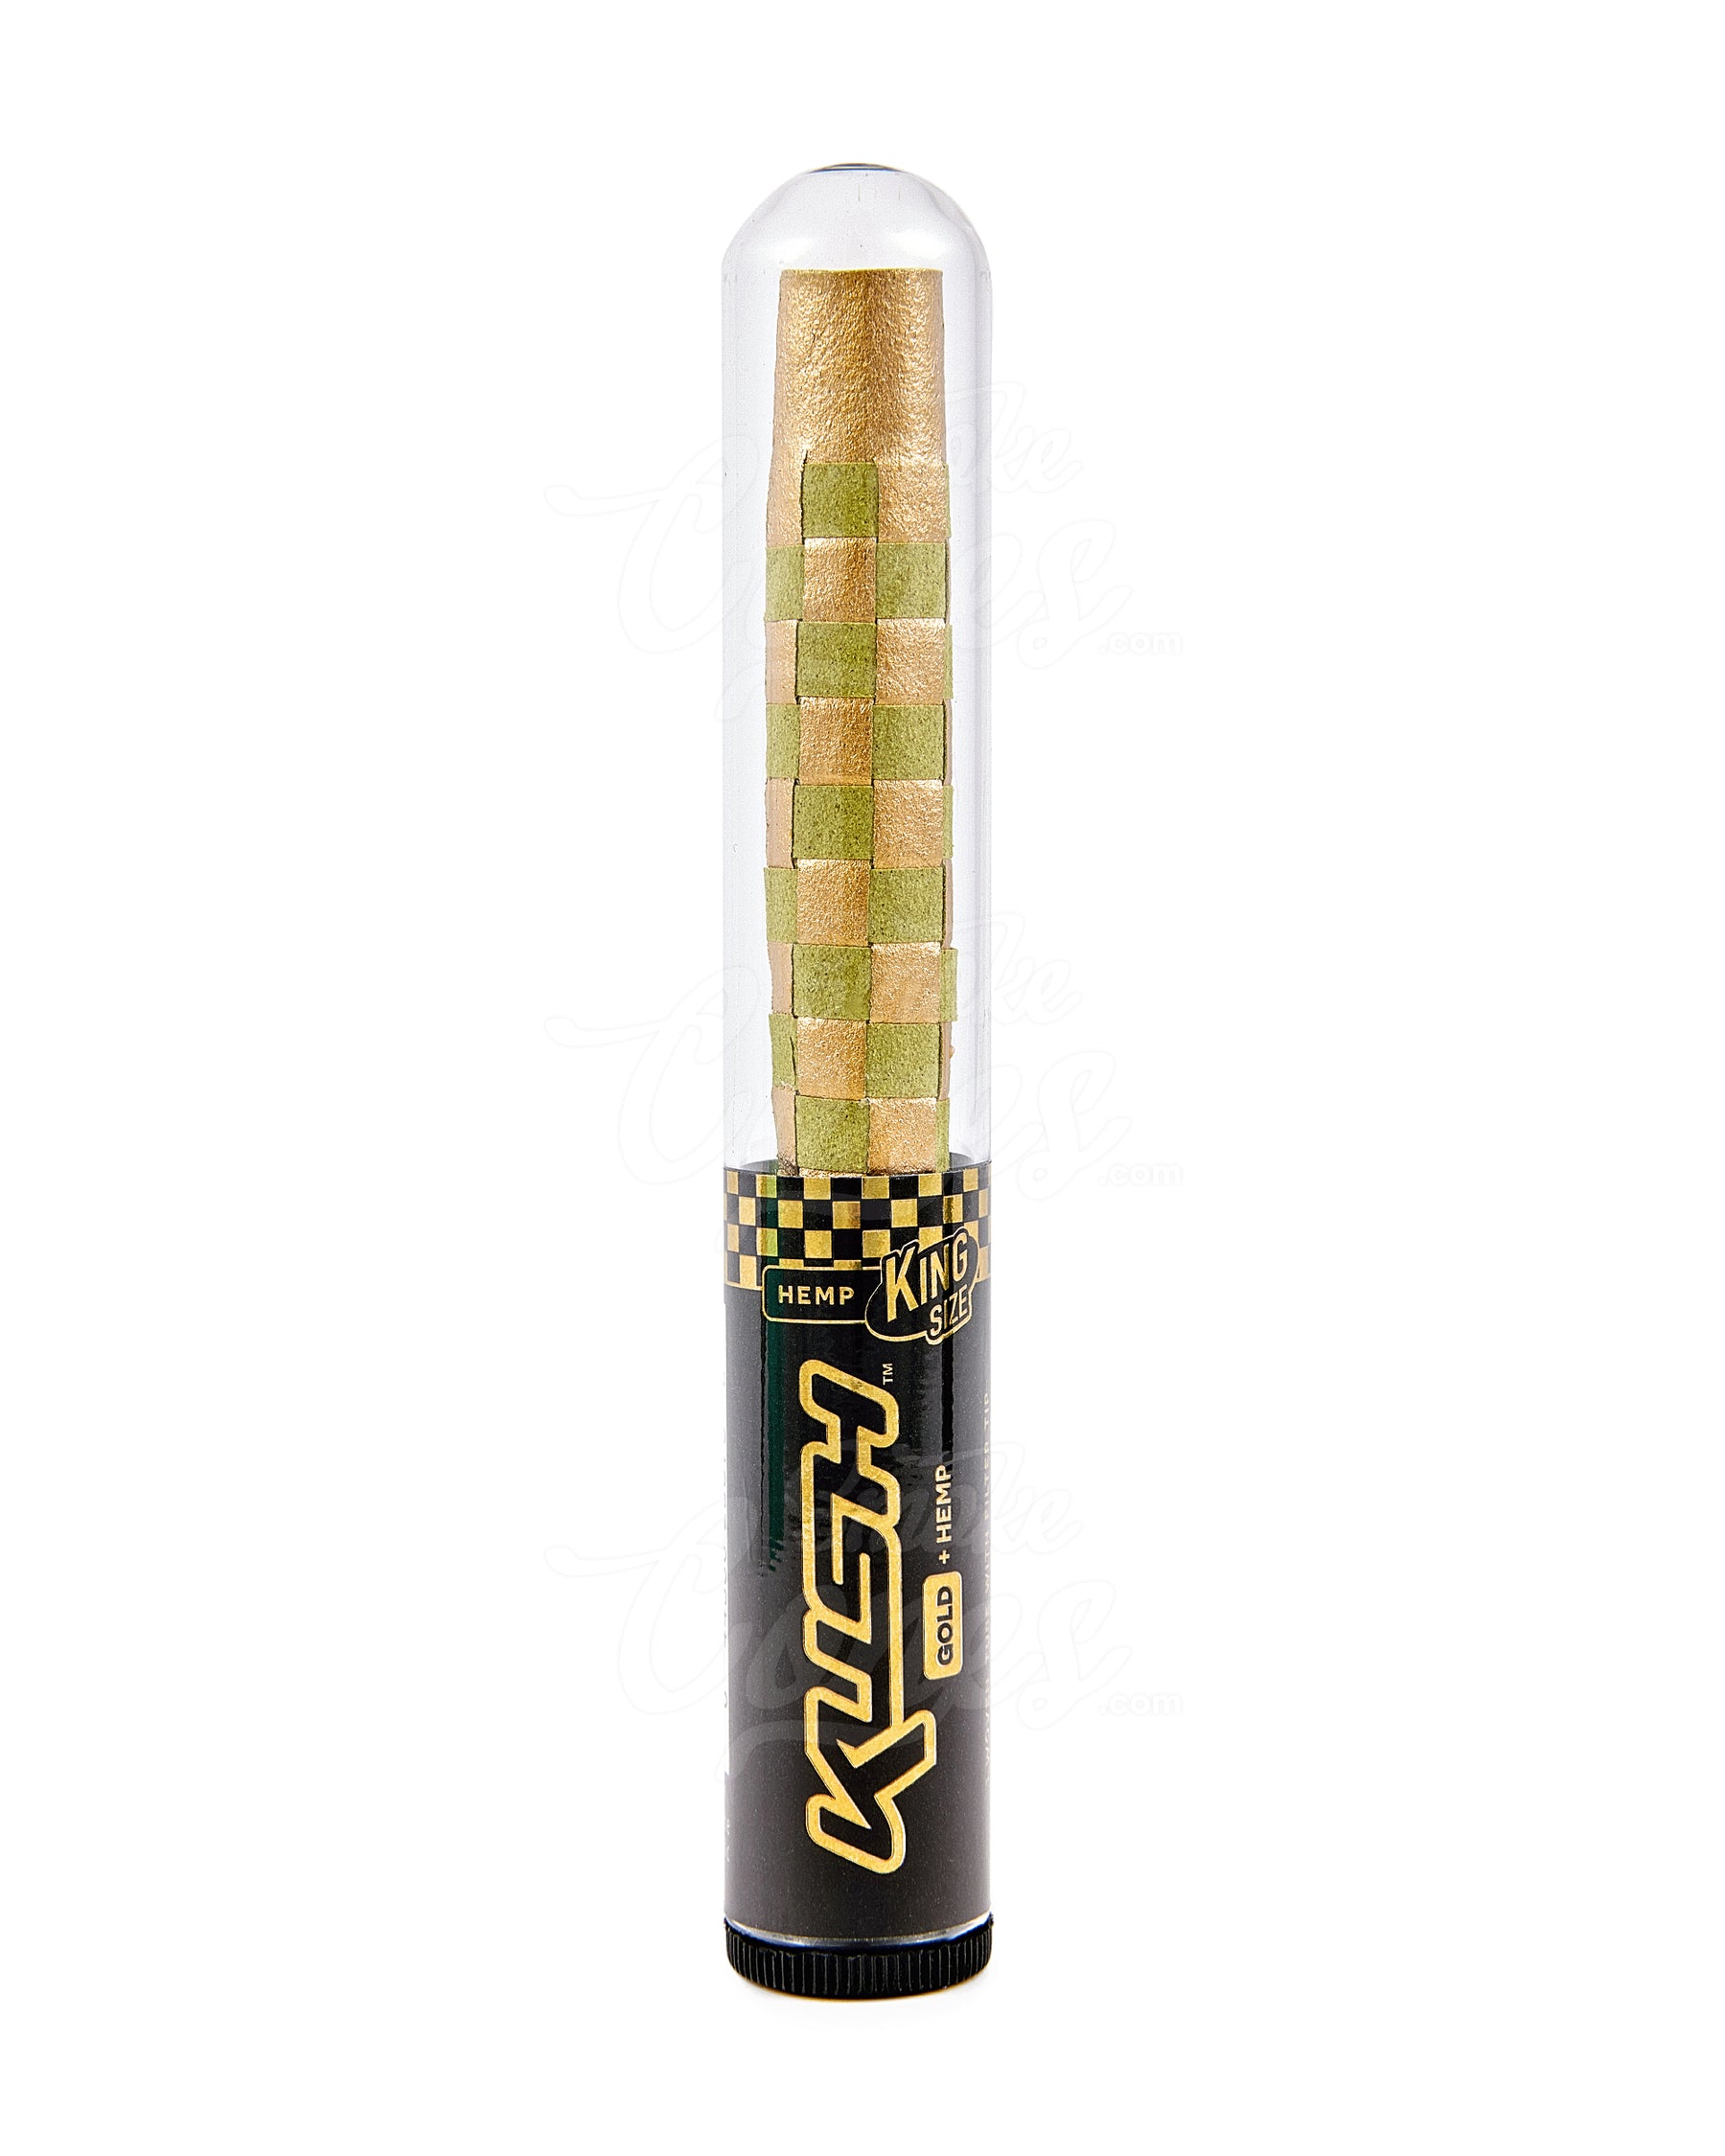 Kush 24K Gold Woven Hemp King Size Pre Rolled Cones w/ Filter Tip 4/Box - 2